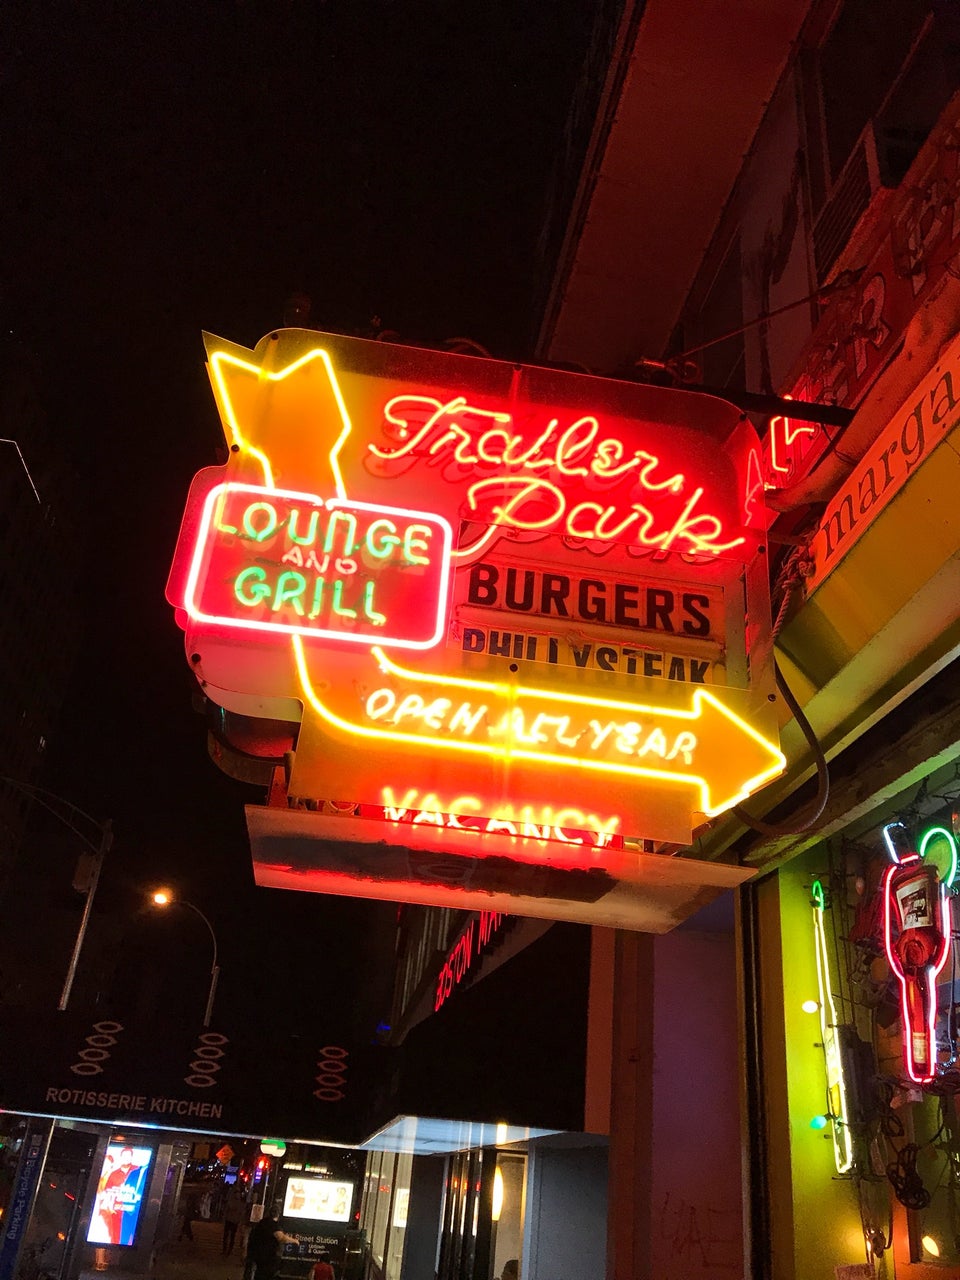 Photo of Trailer Park Lounge & Grill